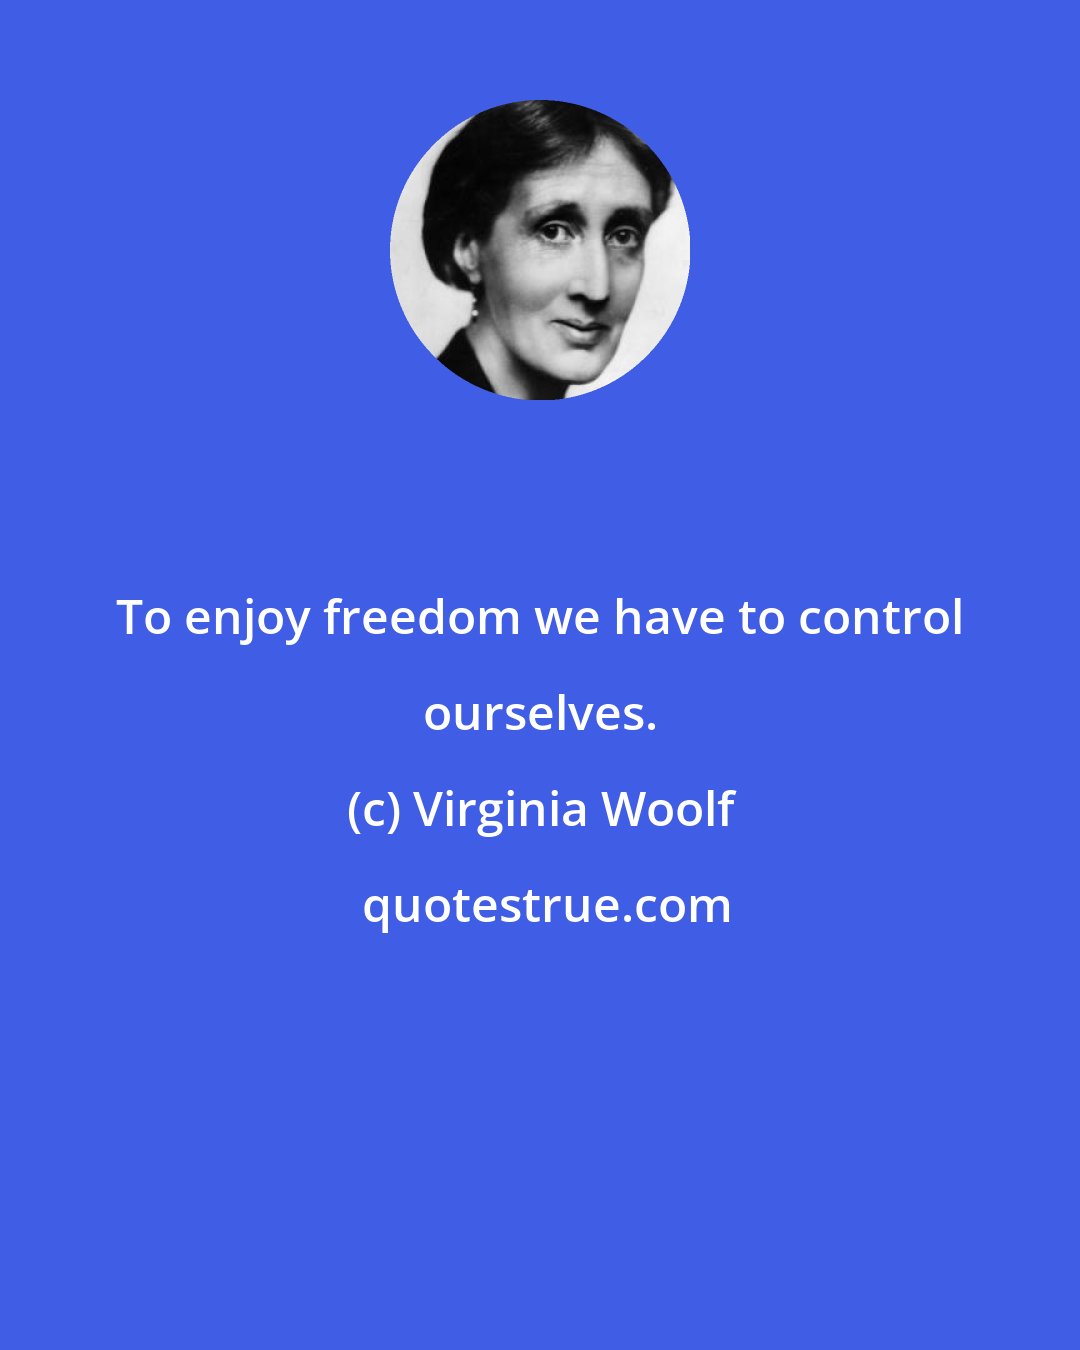 Virginia Woolf: To enjoy freedom we have to control ourselves.